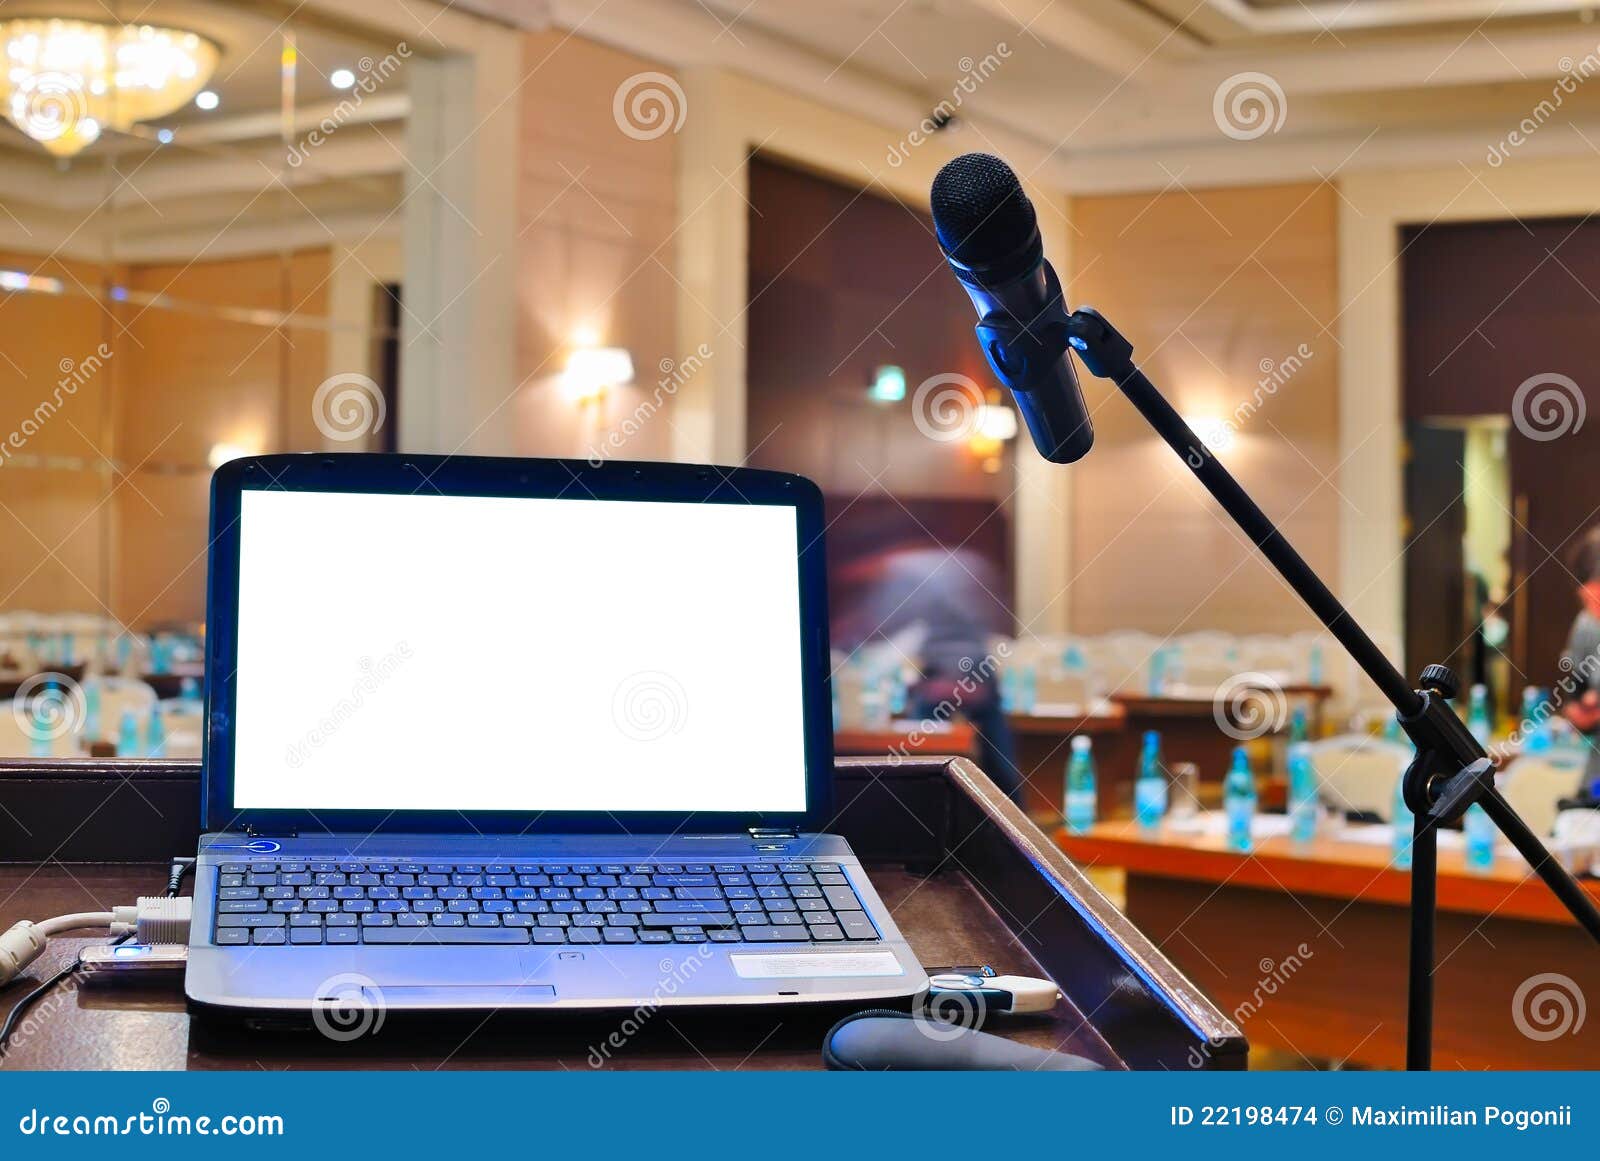 the rostrum with notebook waiting for a speaker